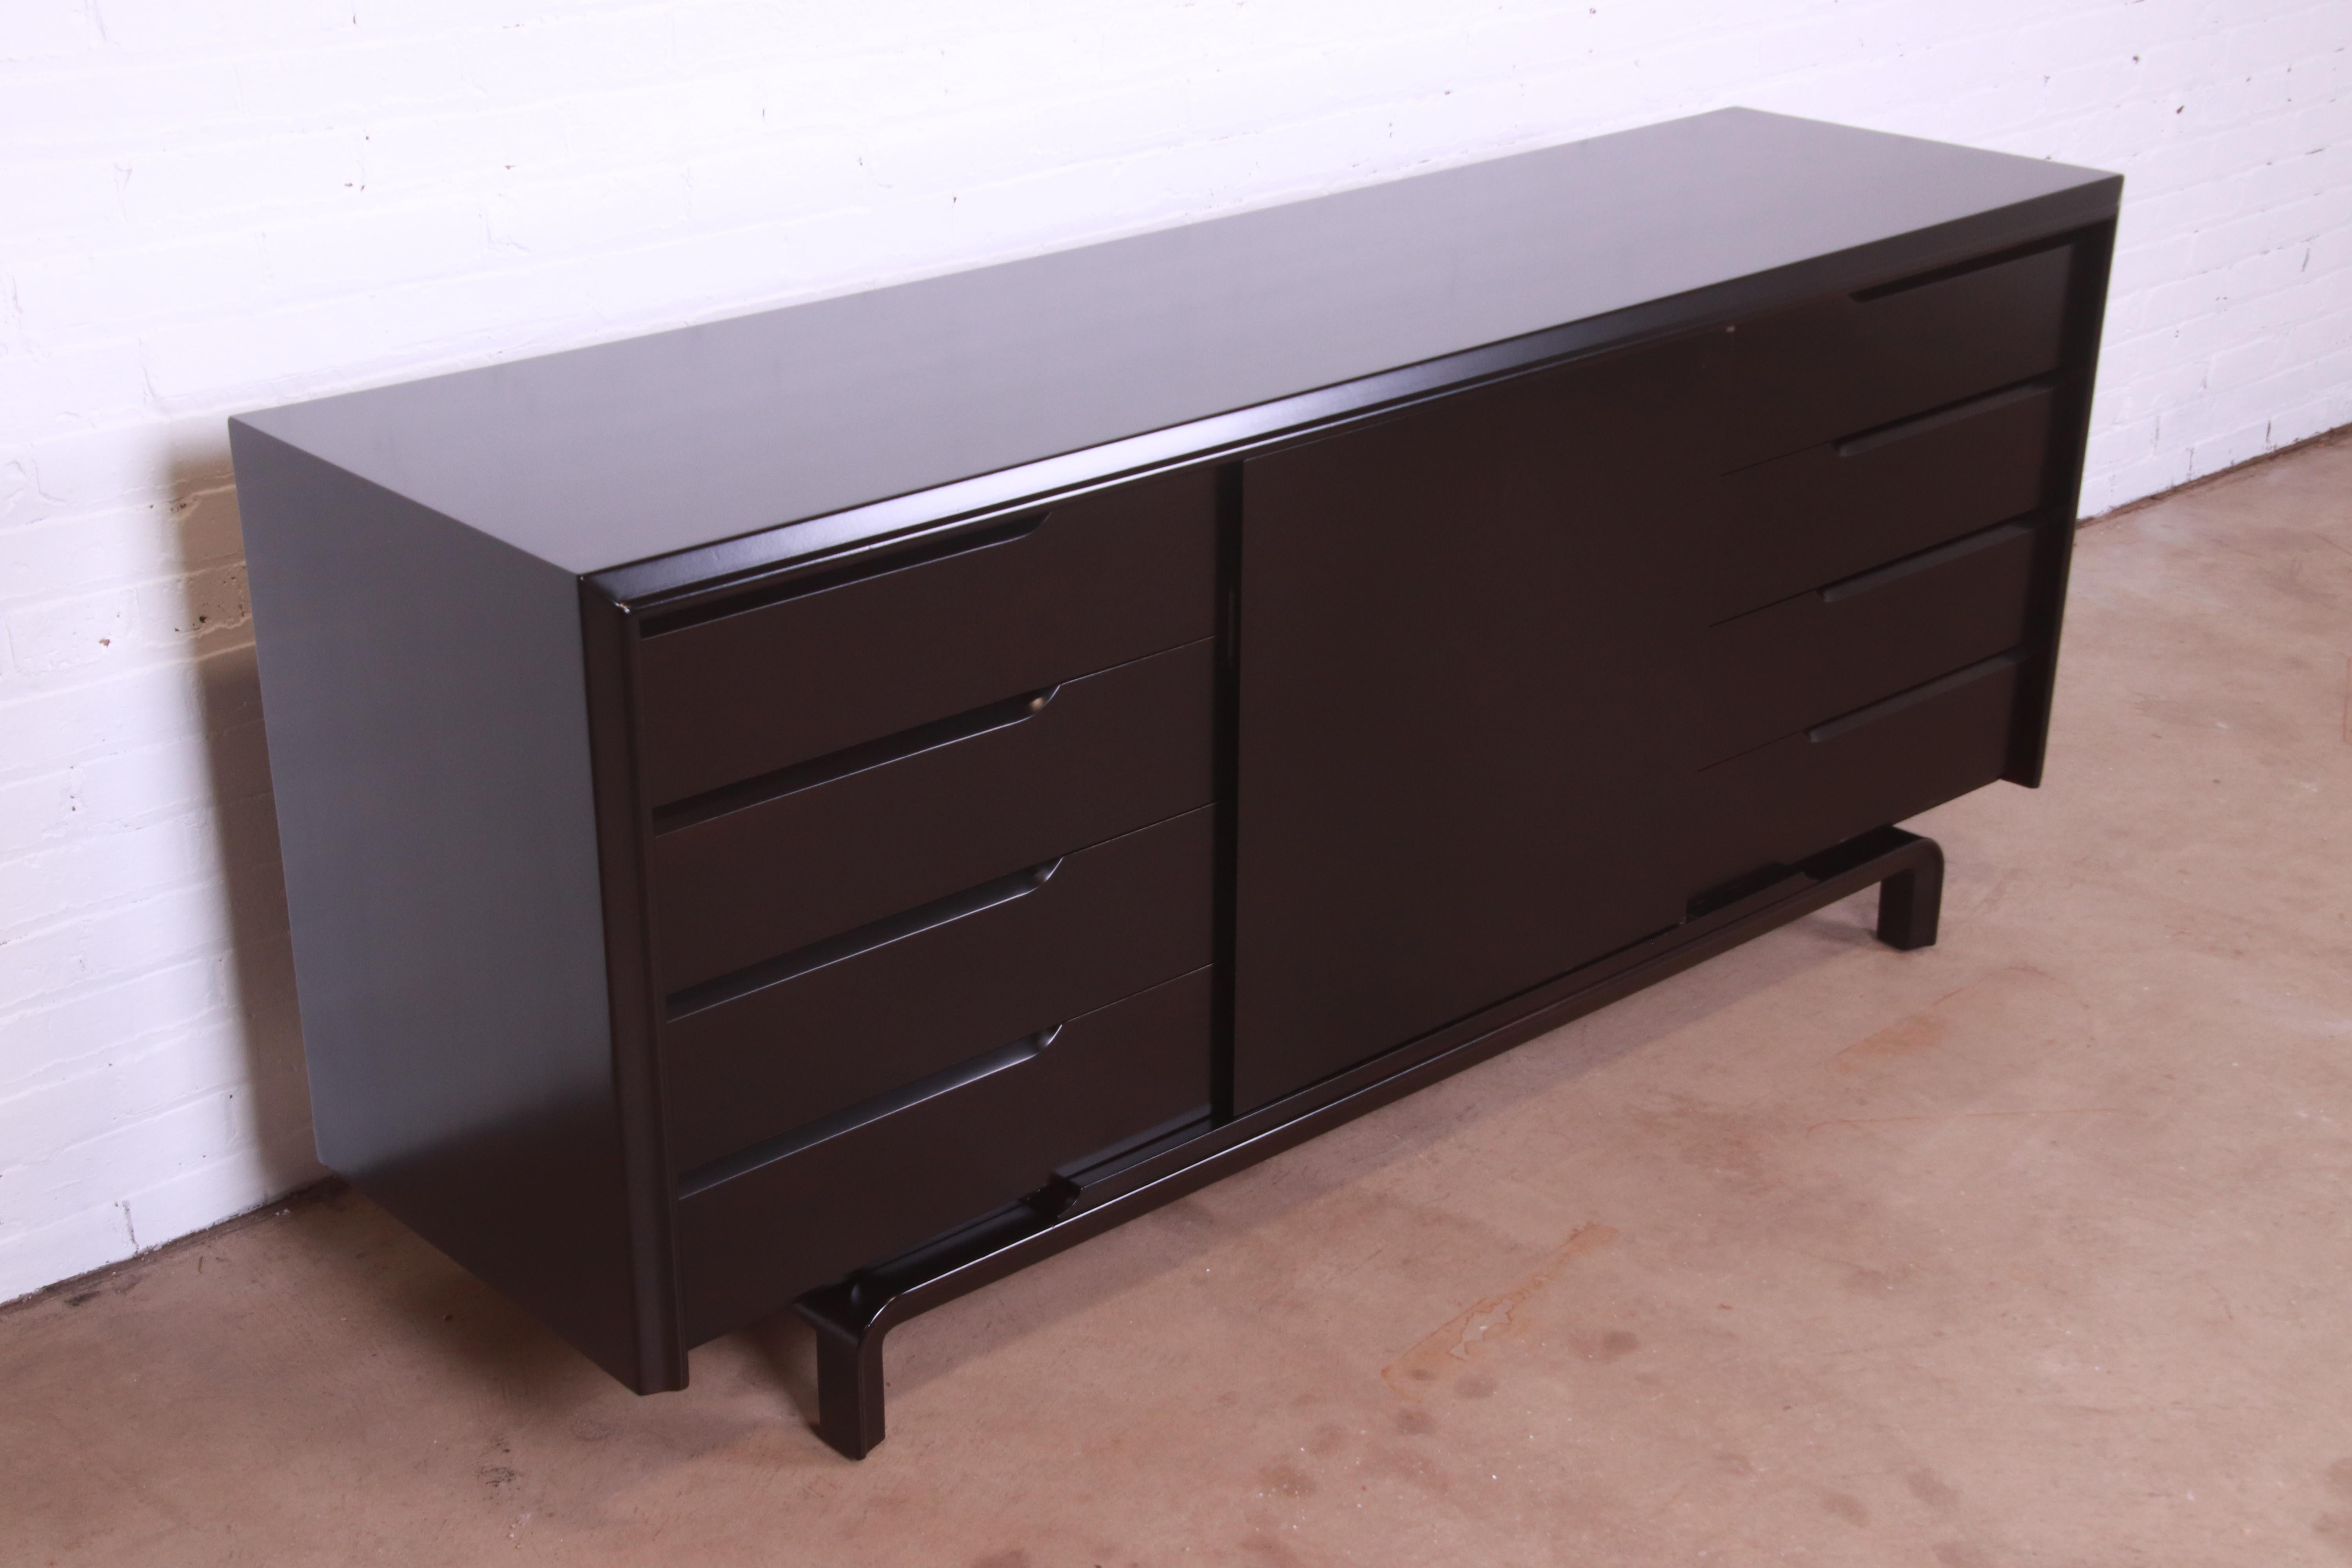 Birch Edmond Spence Swedish Modern Black Lacquered Sideboard Credenza, Refinished For Sale